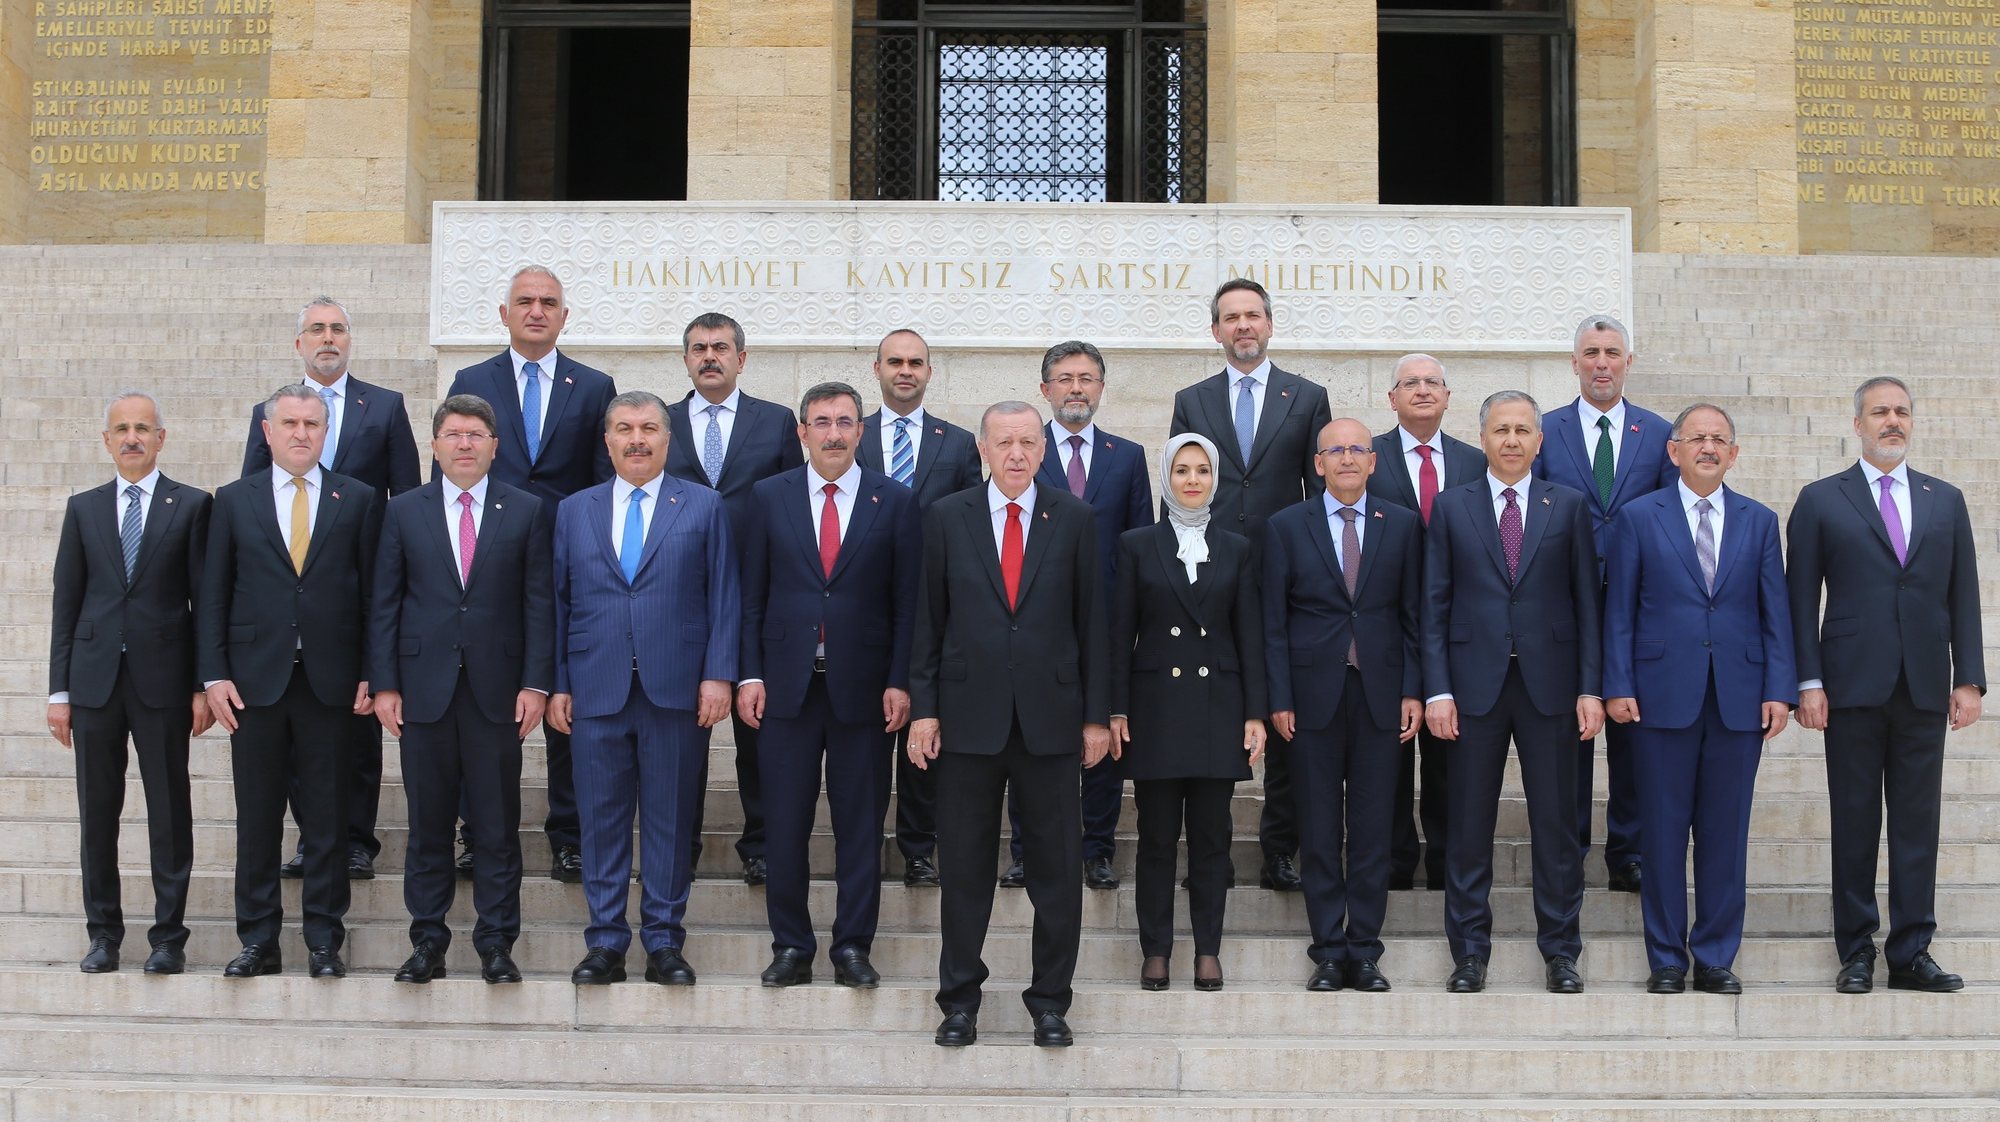 epa10675808 Turkish President Recep Tayyip Erdogan (front-C) and new cabinet members, (first row, L-R) Minister of Transport and Infrastructure Abdulkadir Uraloglu,  Minister of Youth and Sports Osman Askin Bak, Minister of Justice Yilmaz Tunc,  Minister of Health Fahrettin Koca,  Vice President Cevdet Yilmaz, Minister of Family and Social Services Mahinur Ozdemir Goktas, Minister Of Treasury And Finance Mehmet Simsek, Minister of Interior Ali Yerlikaya,  Minister Of Environment, Urbanization And Climate Change Mehmet Ozhaseki, Minister of Foreign Affairs Hakan Fidan, (second row, L-R) Minister of Labor and Social Security Vedat Isikhan, Minister of Culture and Tourism Mehmet Nuri Ersoy, Minister of National Education Yusuf Tekin, Minister of Industry and Technology Mehmet Fatih Kacir, Minister of Agriculture and Forestry Ibrahim Yumakli, Minister of Energy and Natural Resources Alparslan Bayraktar, Minister of National Defense Yasar Guler, Minister of Trade Omer Bolat pose for media after attending a wreath laying ceremony at Ataturk Mausoleum in Ankara, Turkey, 06 June 2023. Turkey&#039;s new Cabinet, announced by President Recep Tayyip Erdogan after his reelection on May 28, will hold its first meeting on 06 June.  EPA/NECATI SAVAS